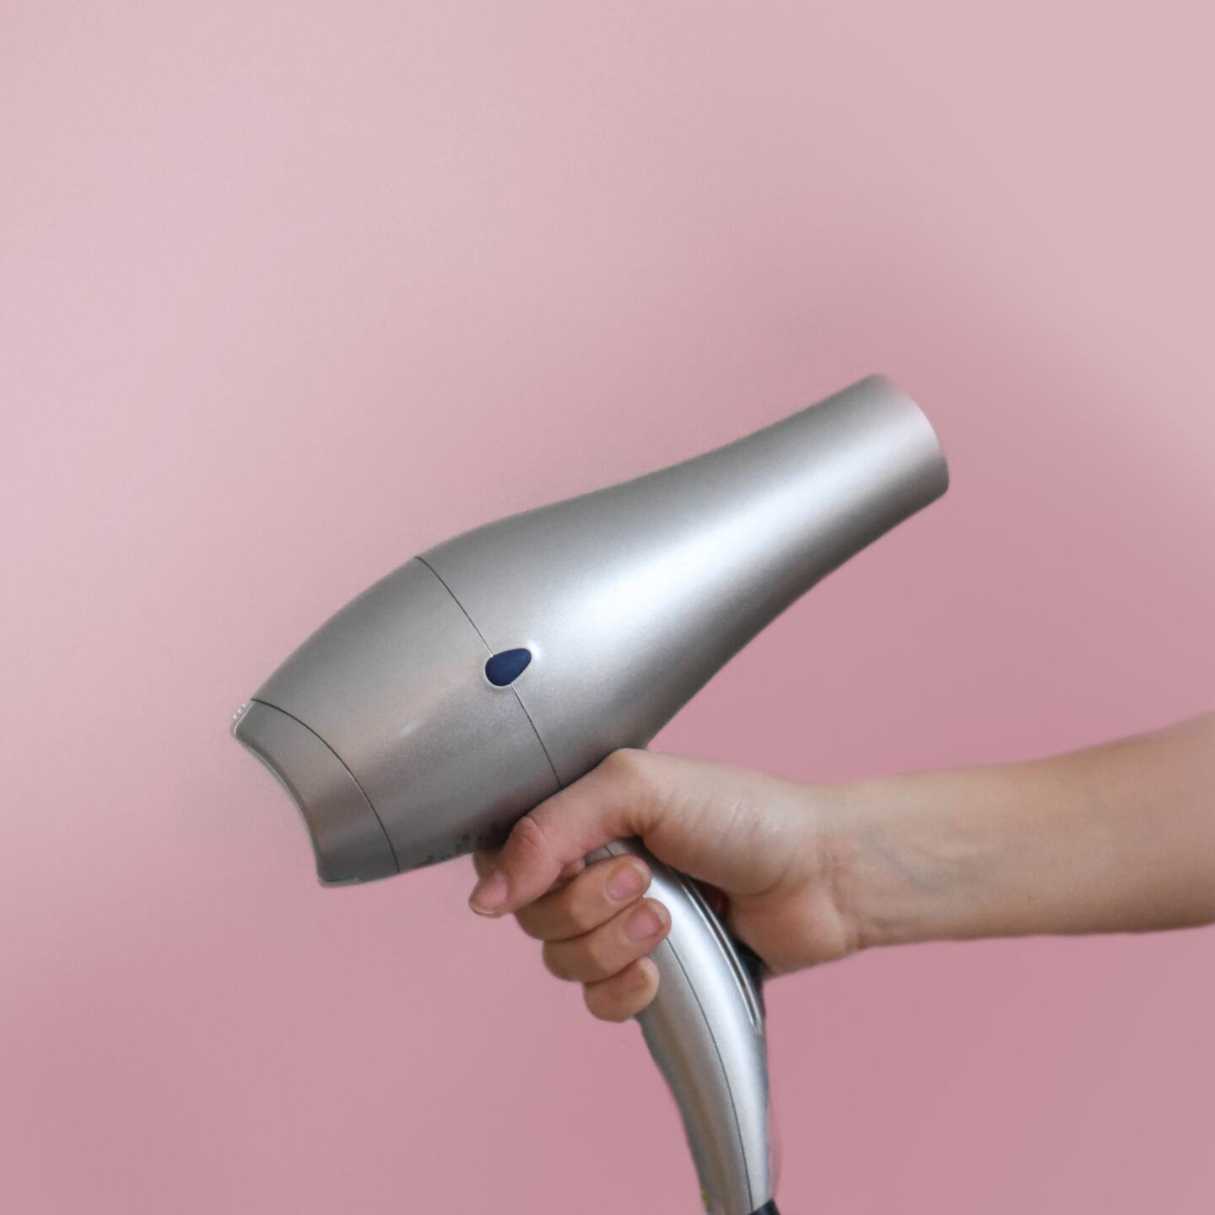 How To Clean A Sticky Hair Dryer